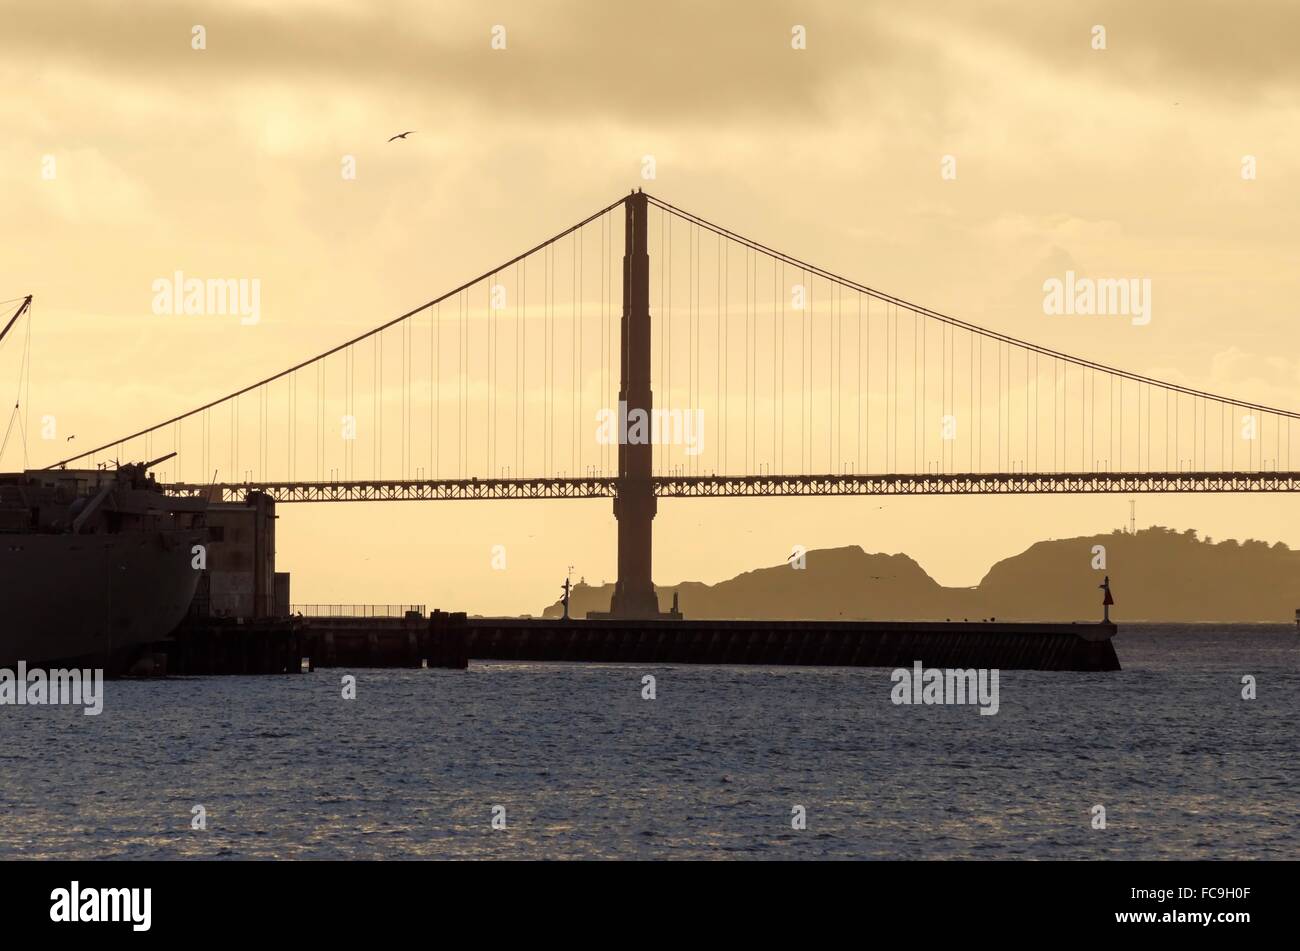 A Side View Of The Famous San Francisco Golden Gate Bridge In California United States At Sunset A Profile View From The Bay Stock Photo Alamy